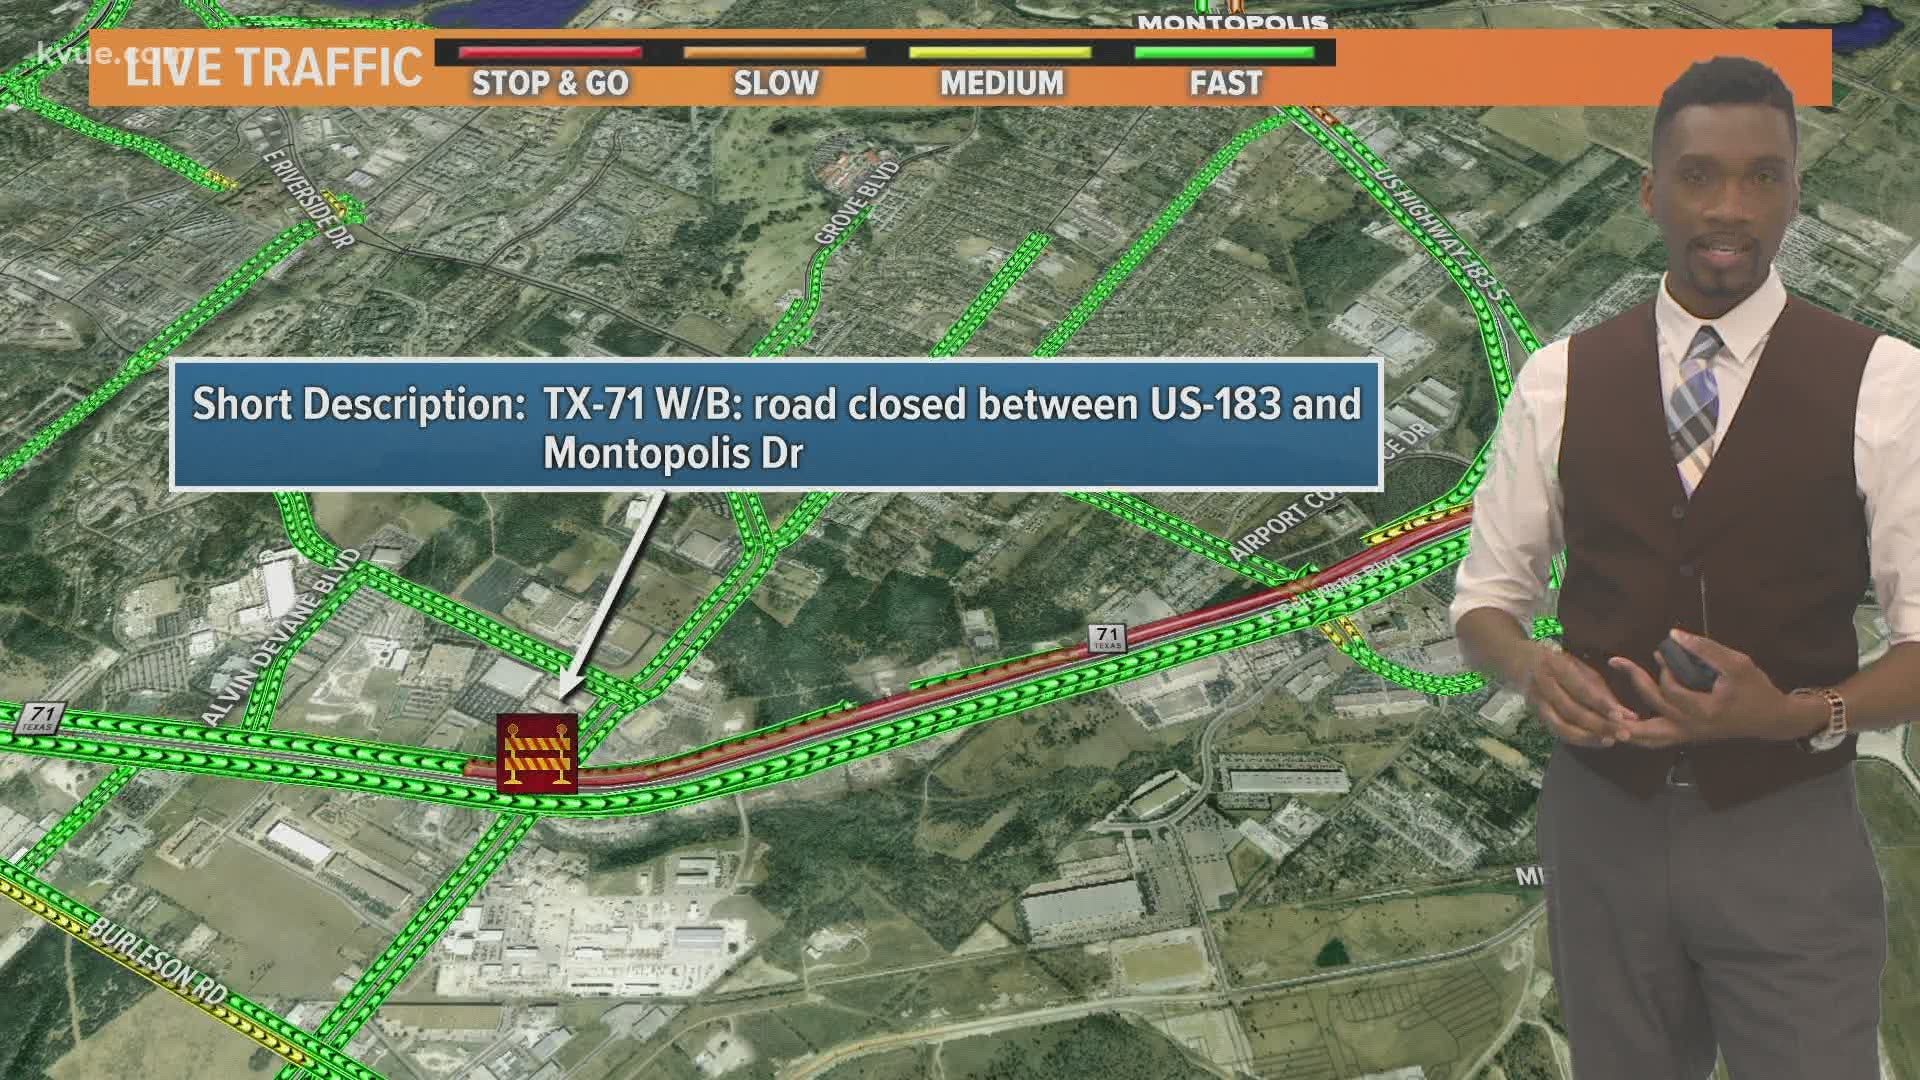 Closures are expected until 8 a.m.